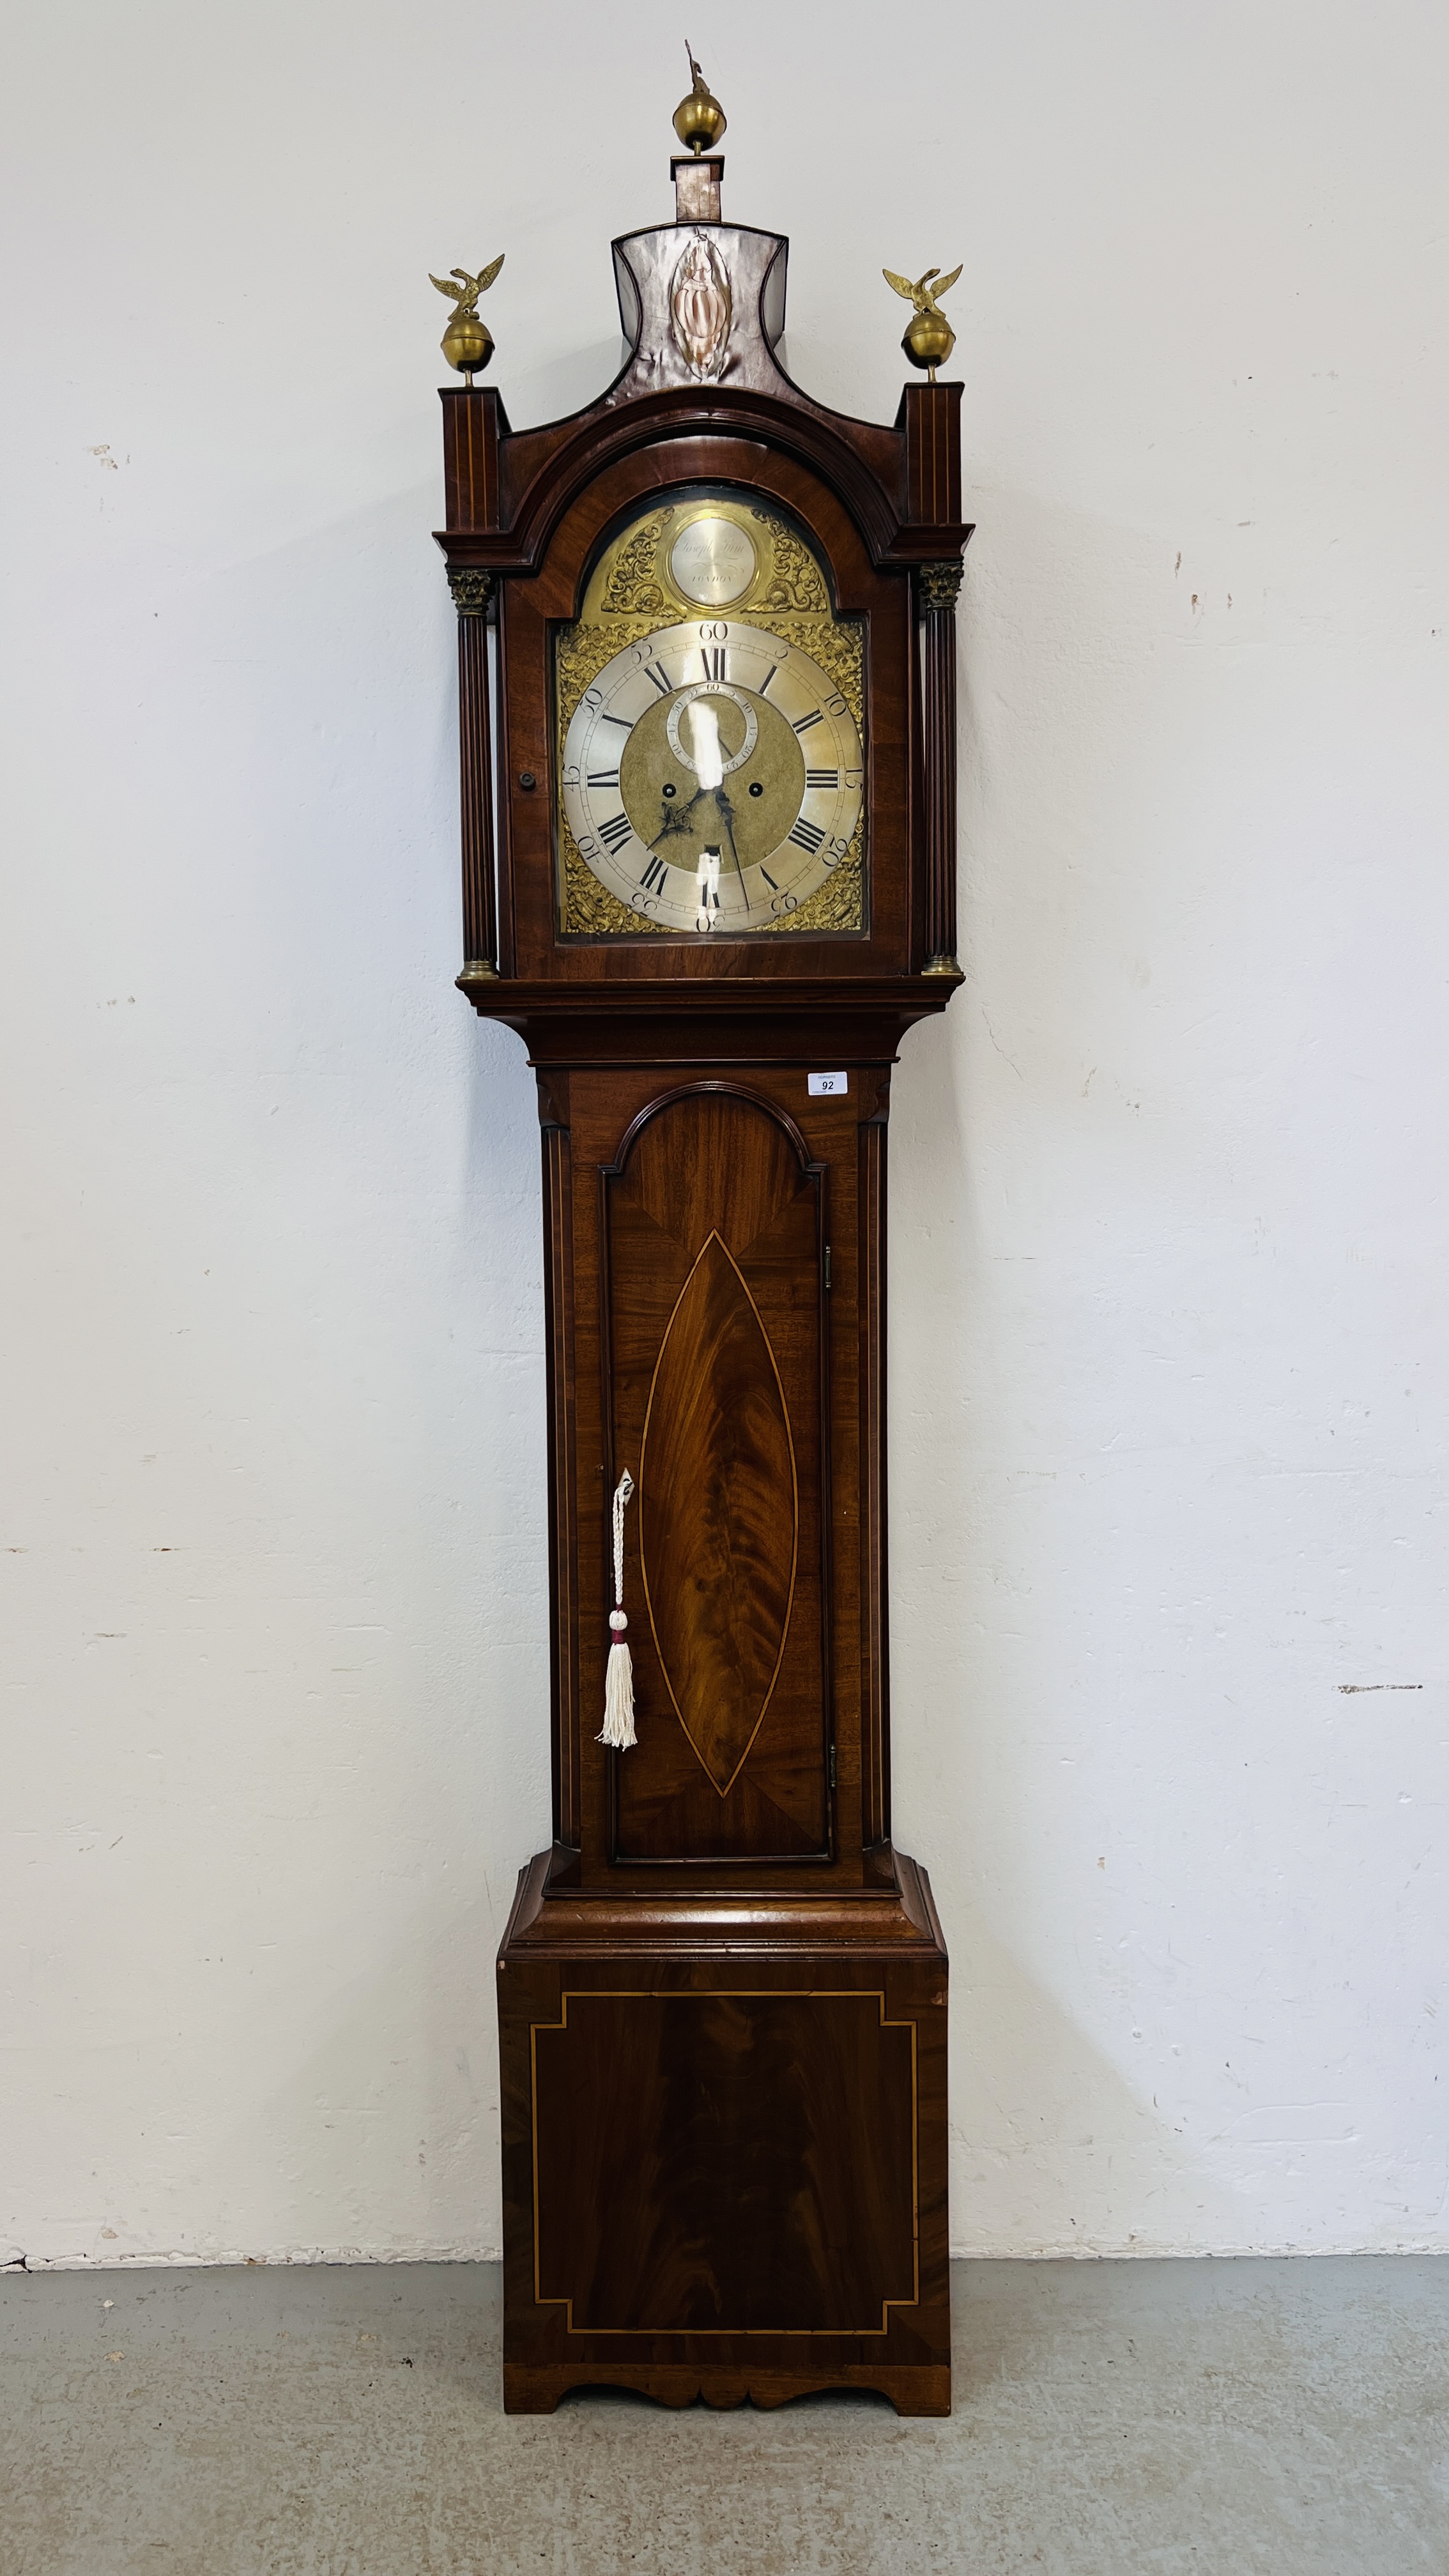 AN INLAID MAHOGANY GRANDFATHER CLOCK WITH JOSEPH LUM FACE COMPLETE WITH KEY AND PENDULUM